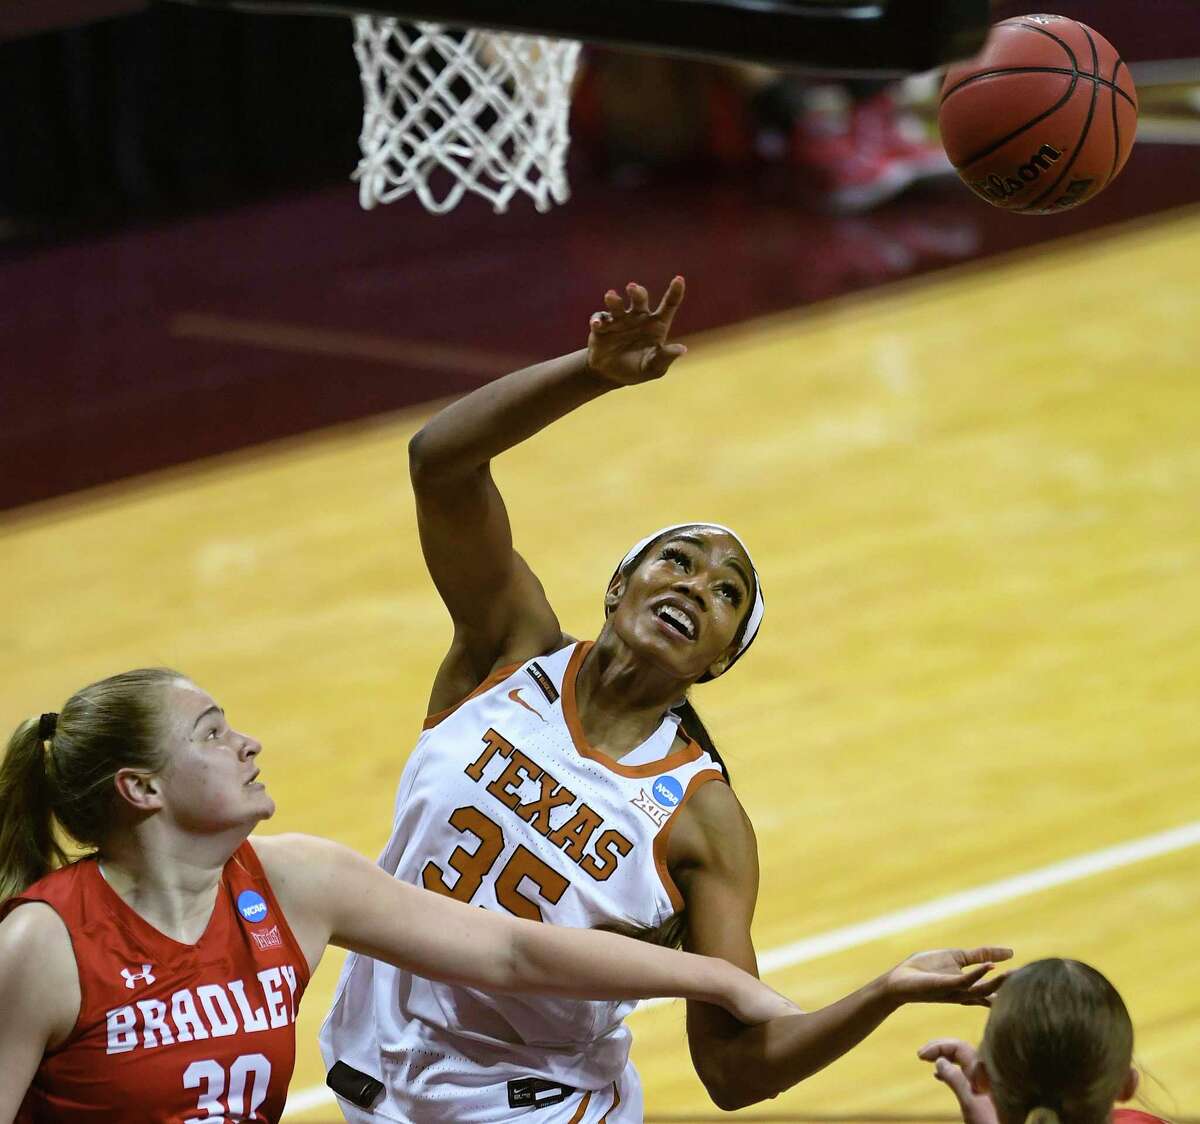 Texas center Charli Collier (35) battles Emily March (30) and Gabi Haack (3) of Bradley for a rebound during the first round of the NCAA Division I Women’s Basketball Tournament in San Marcos on Monday, March 22, 2021.